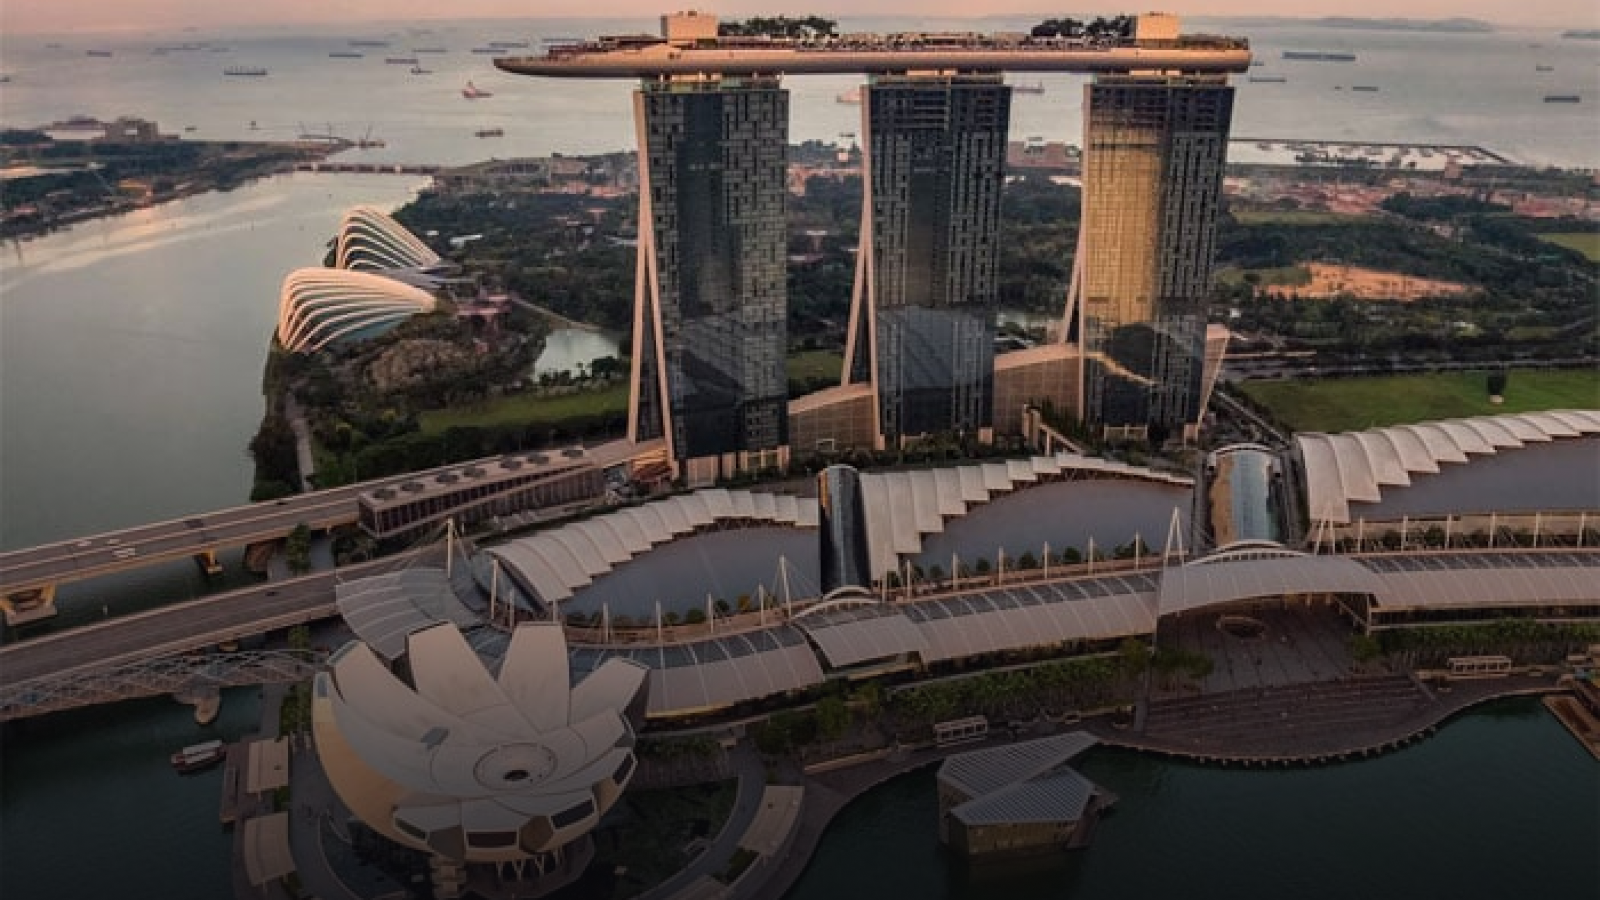 "Singapore Shines in the Top 10 Least Corrupt Countries Worldwide"